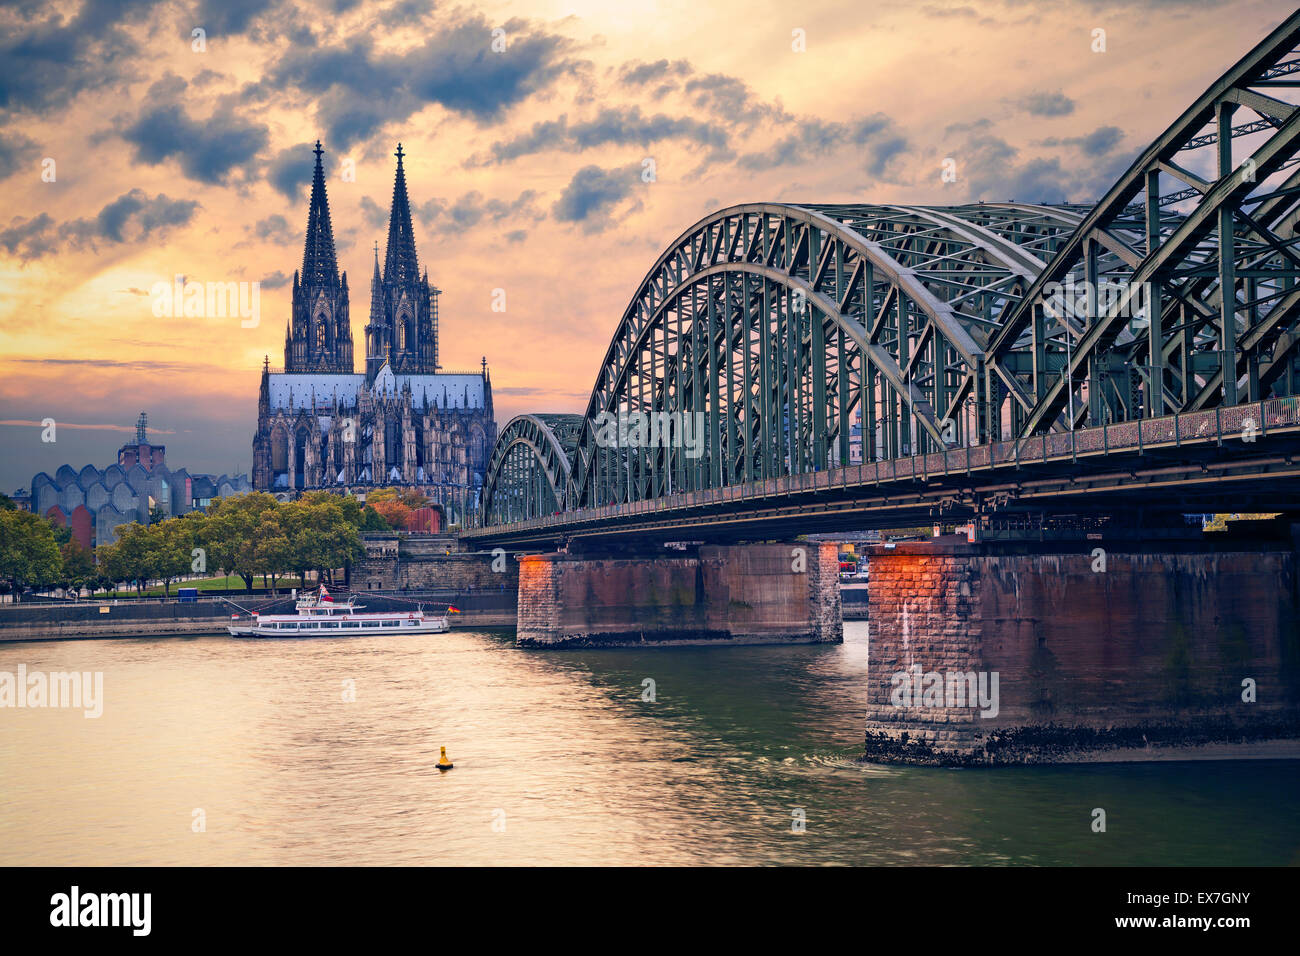 Cologne. Image of Cologne with Cologne Cathedral and Hohenzollern bridge across the Rhine River. Stock Photo